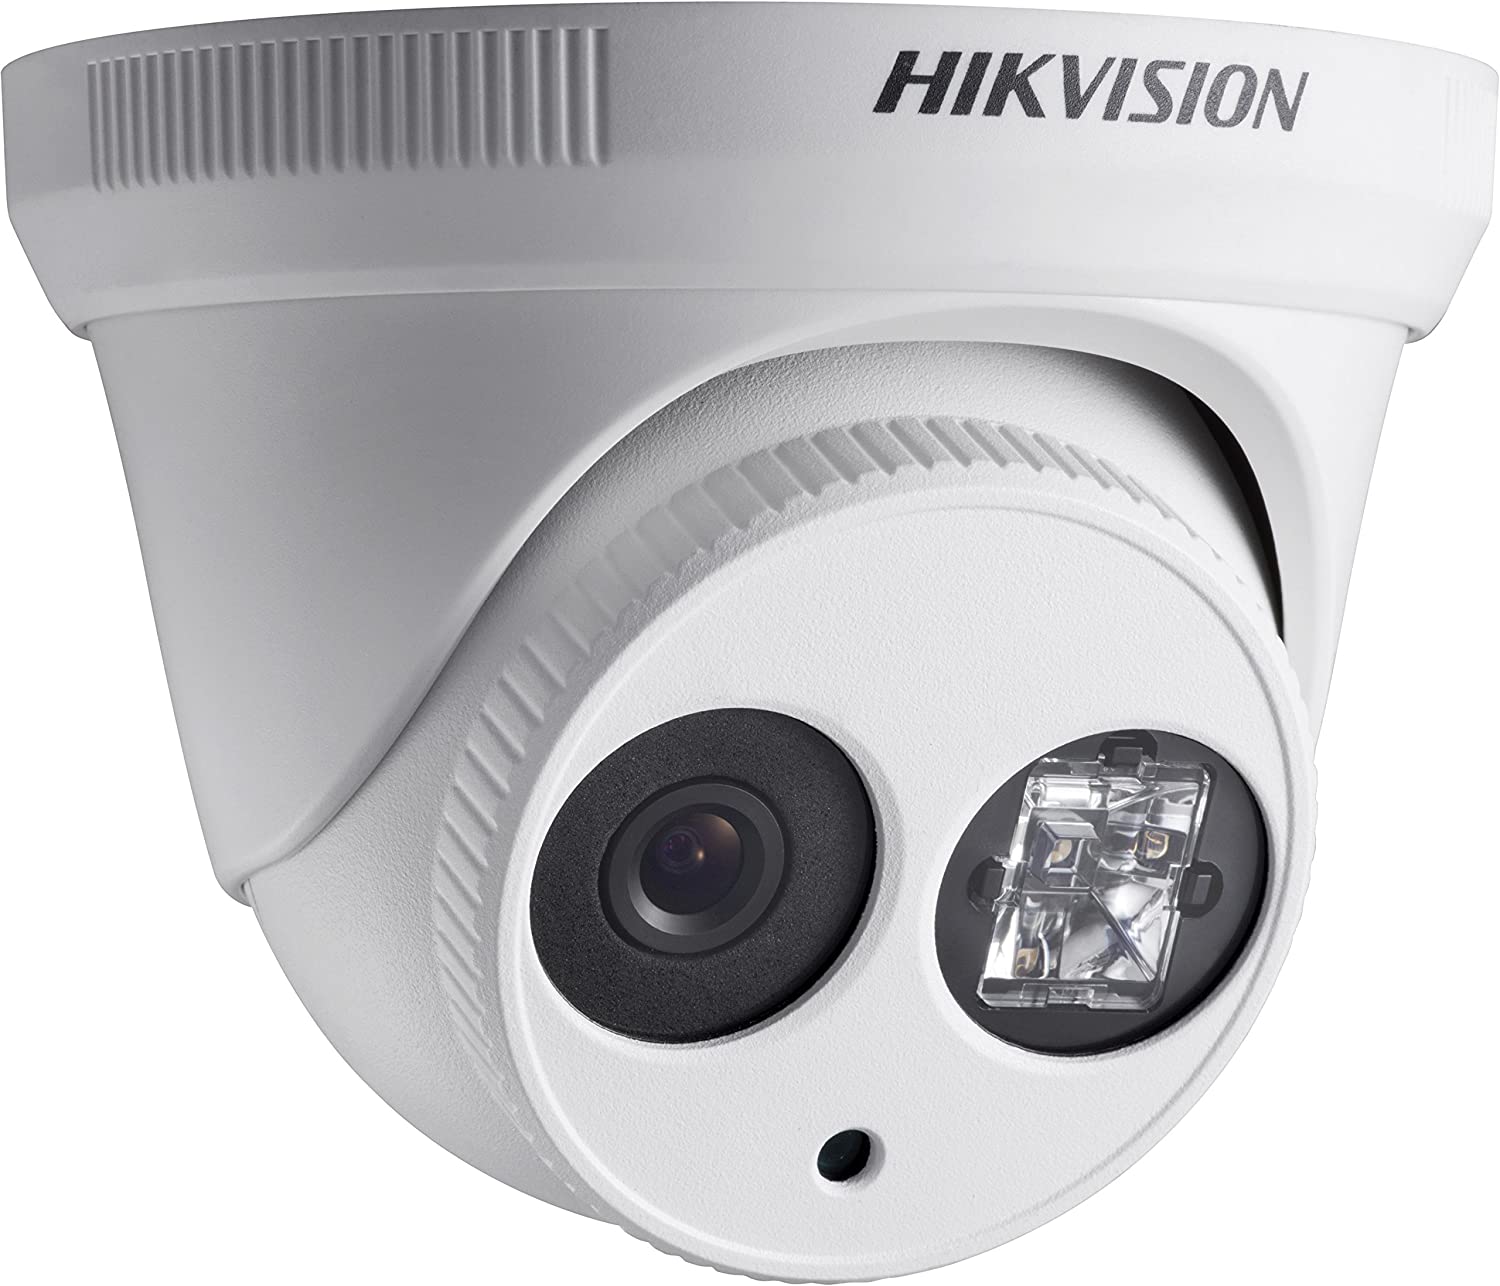 Never Been Used Hikvision HikVision indoor/outdoor IR Turret Camera IP66 Boxed 